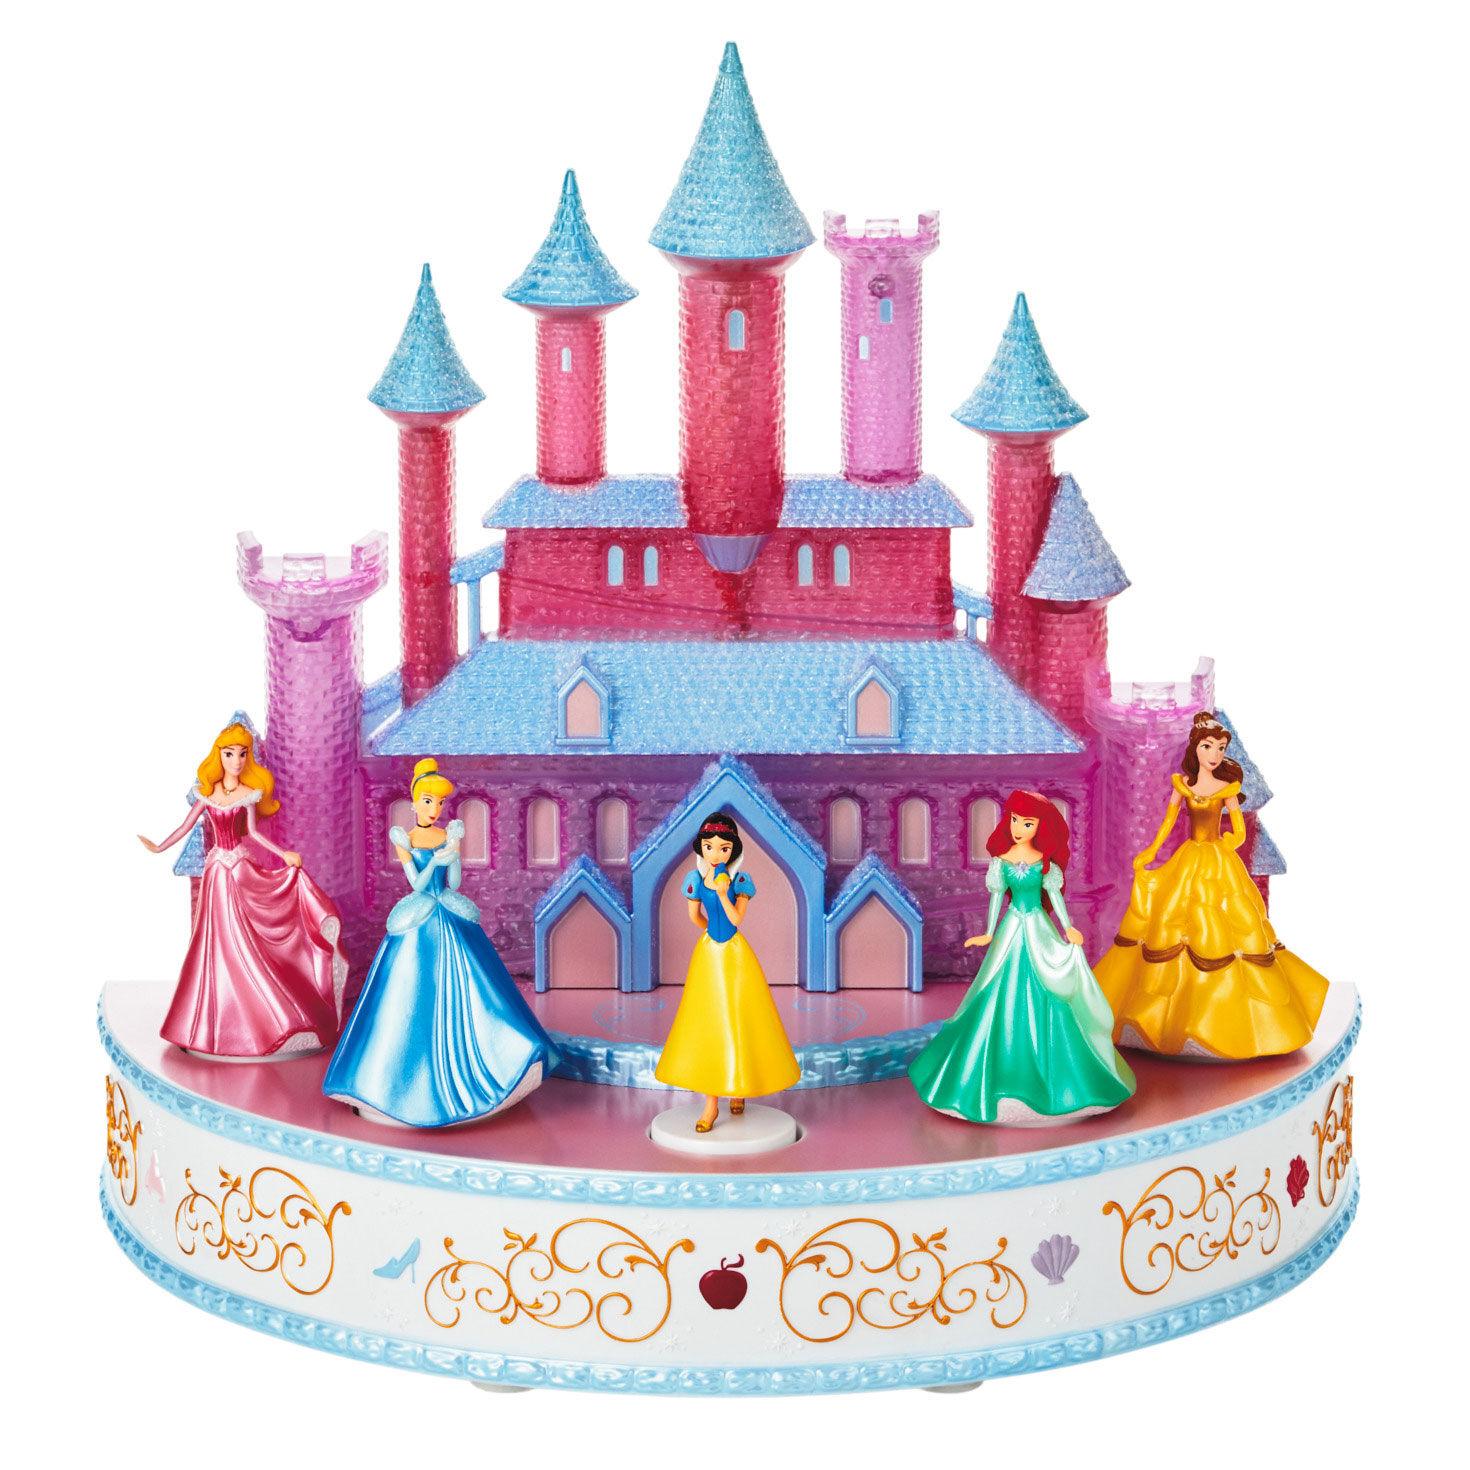 https://www.hallmark.com/dw/image/v2/AALB_PRD/on/demandware.static/-/Sites-hallmark-master/default/dw9dfe9df9/images/finished-goods/products/1QFM3339/Disney-Princess-Music-and-Light-Table-Decoration_1QFM3339_01.jpg?sfrm=jpg